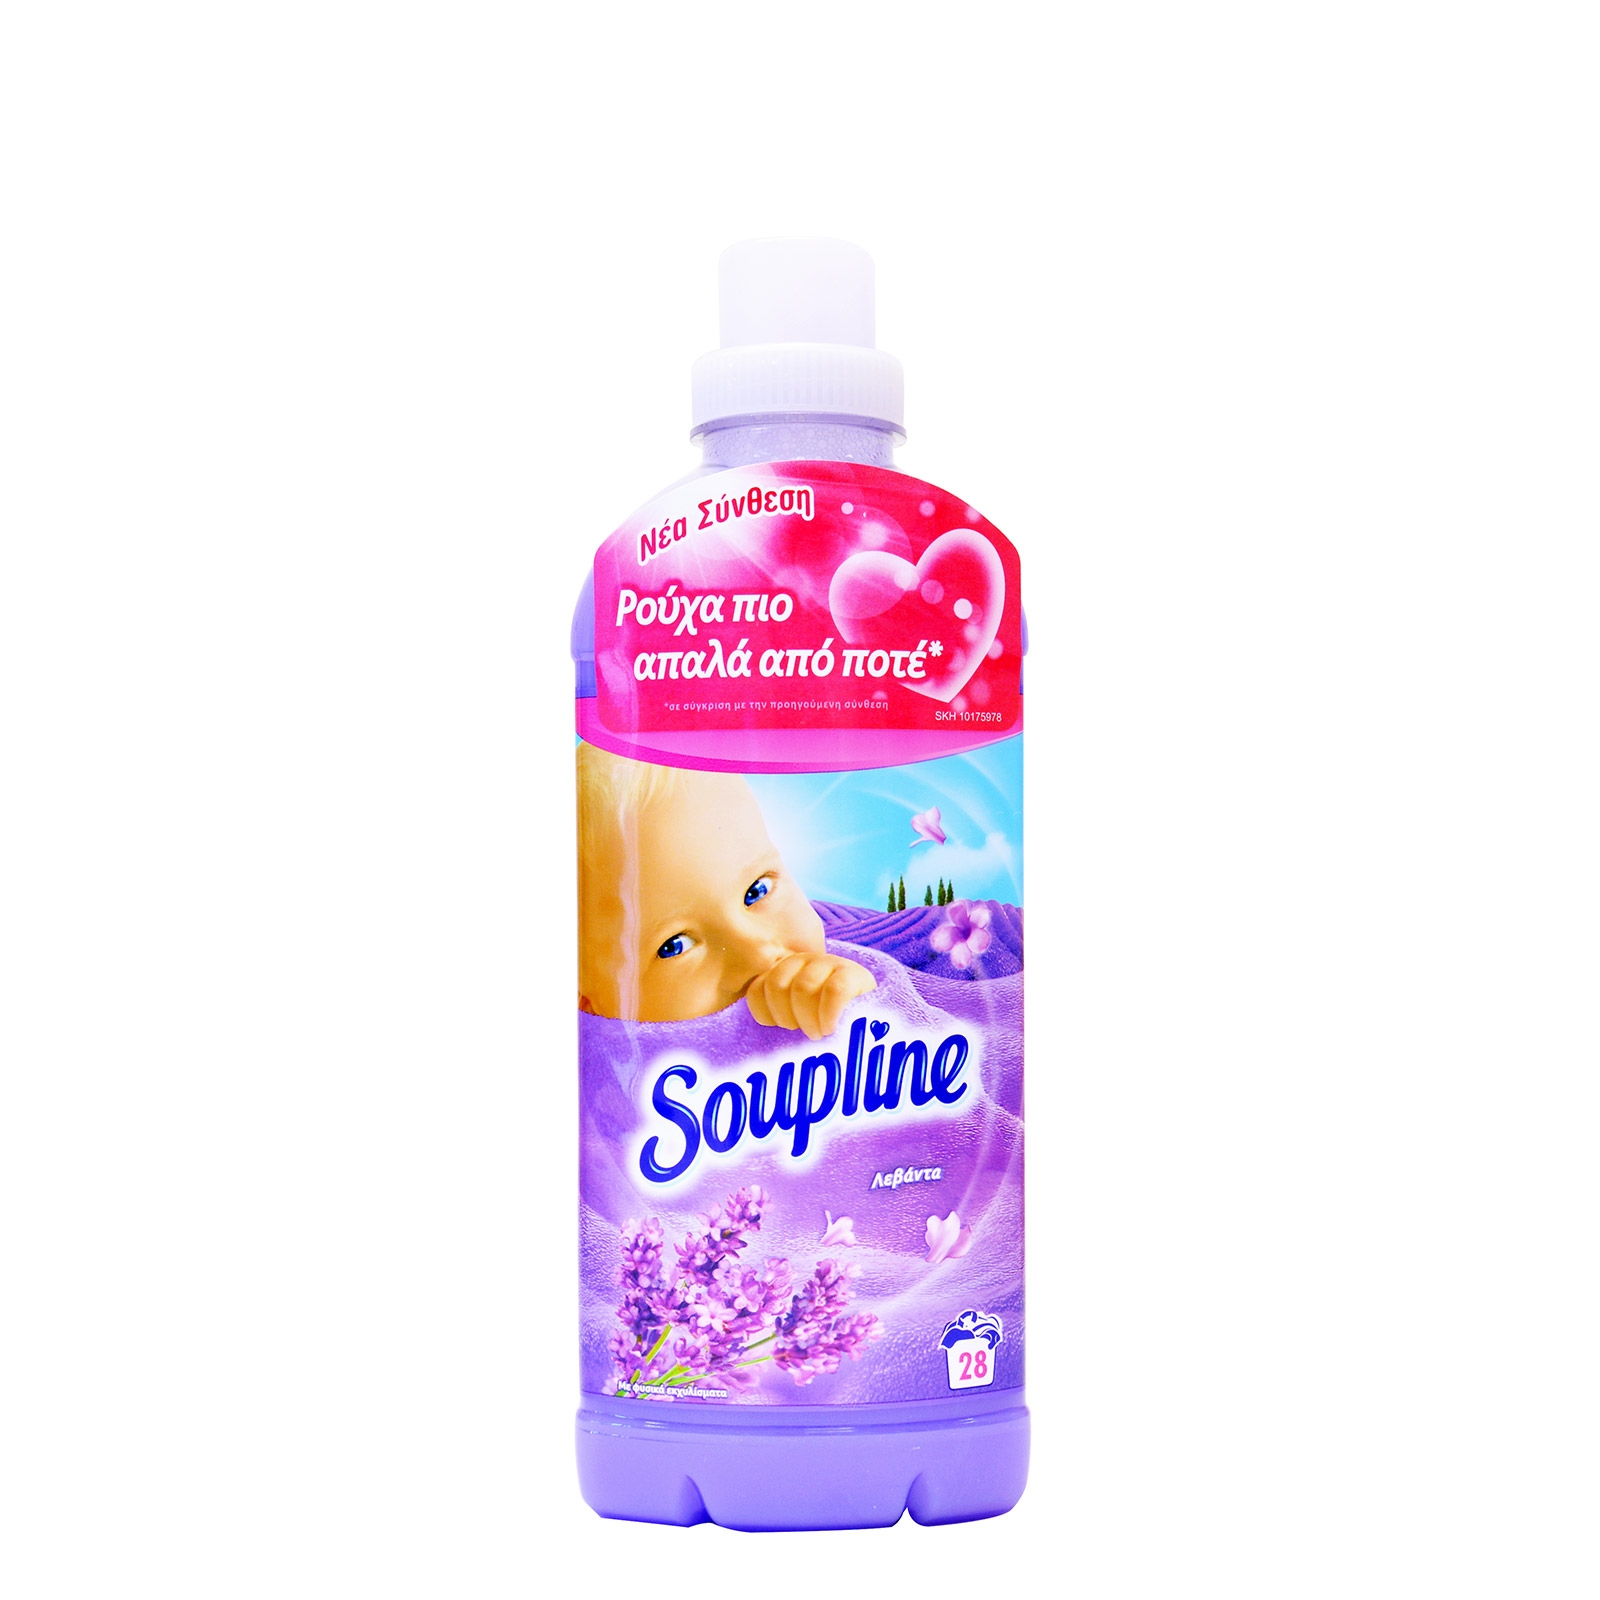 Soupline fabric softener concentrated Moutain Lavender 630ml